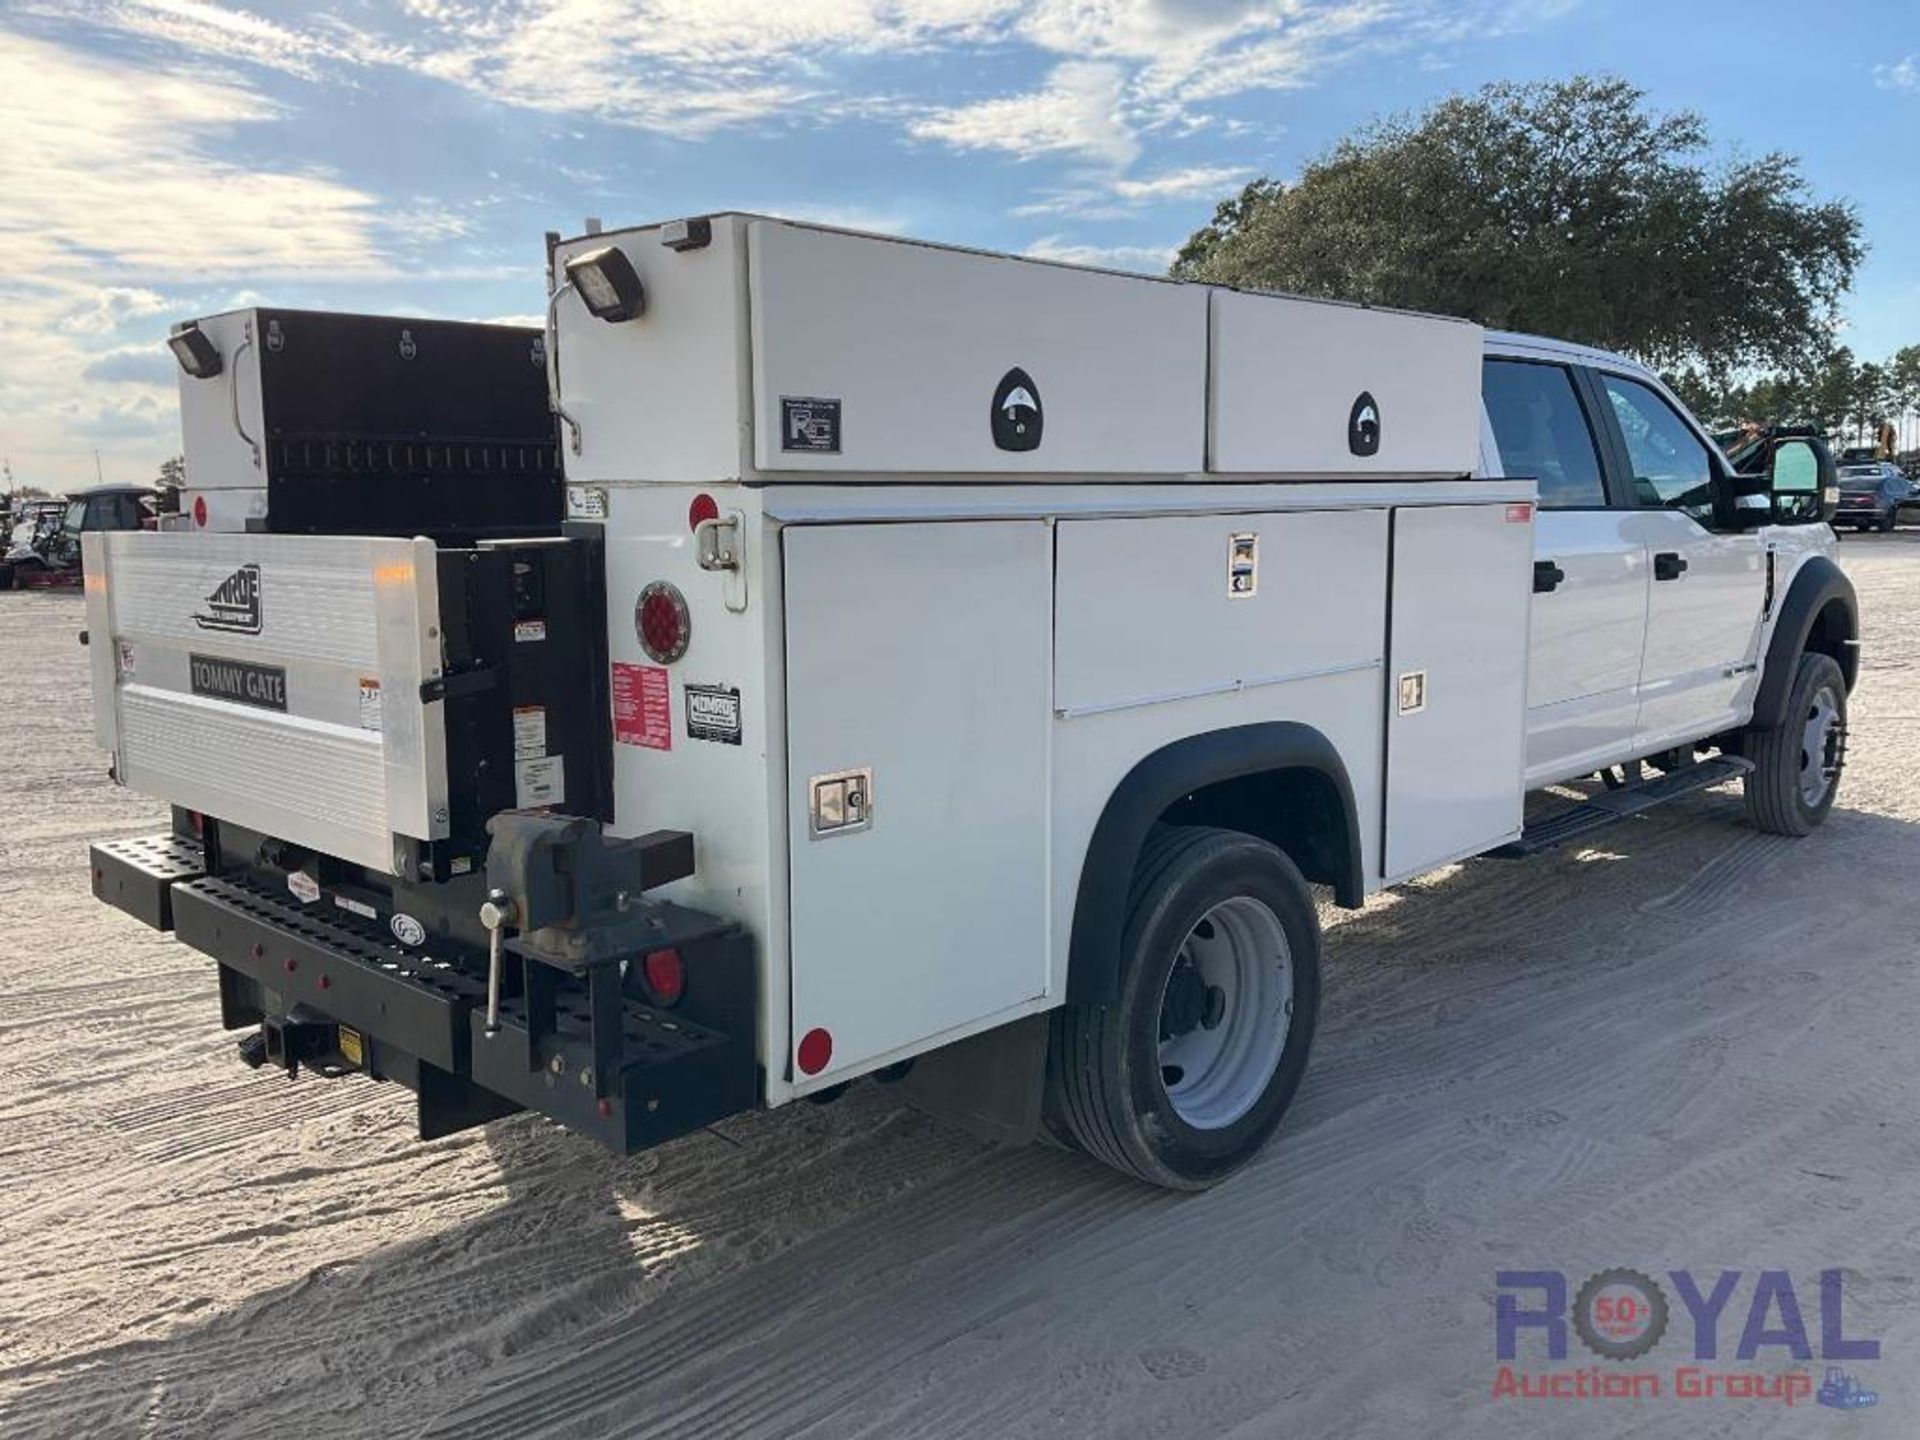 2019 F450 4x4 Service Truck - Image 3 of 34